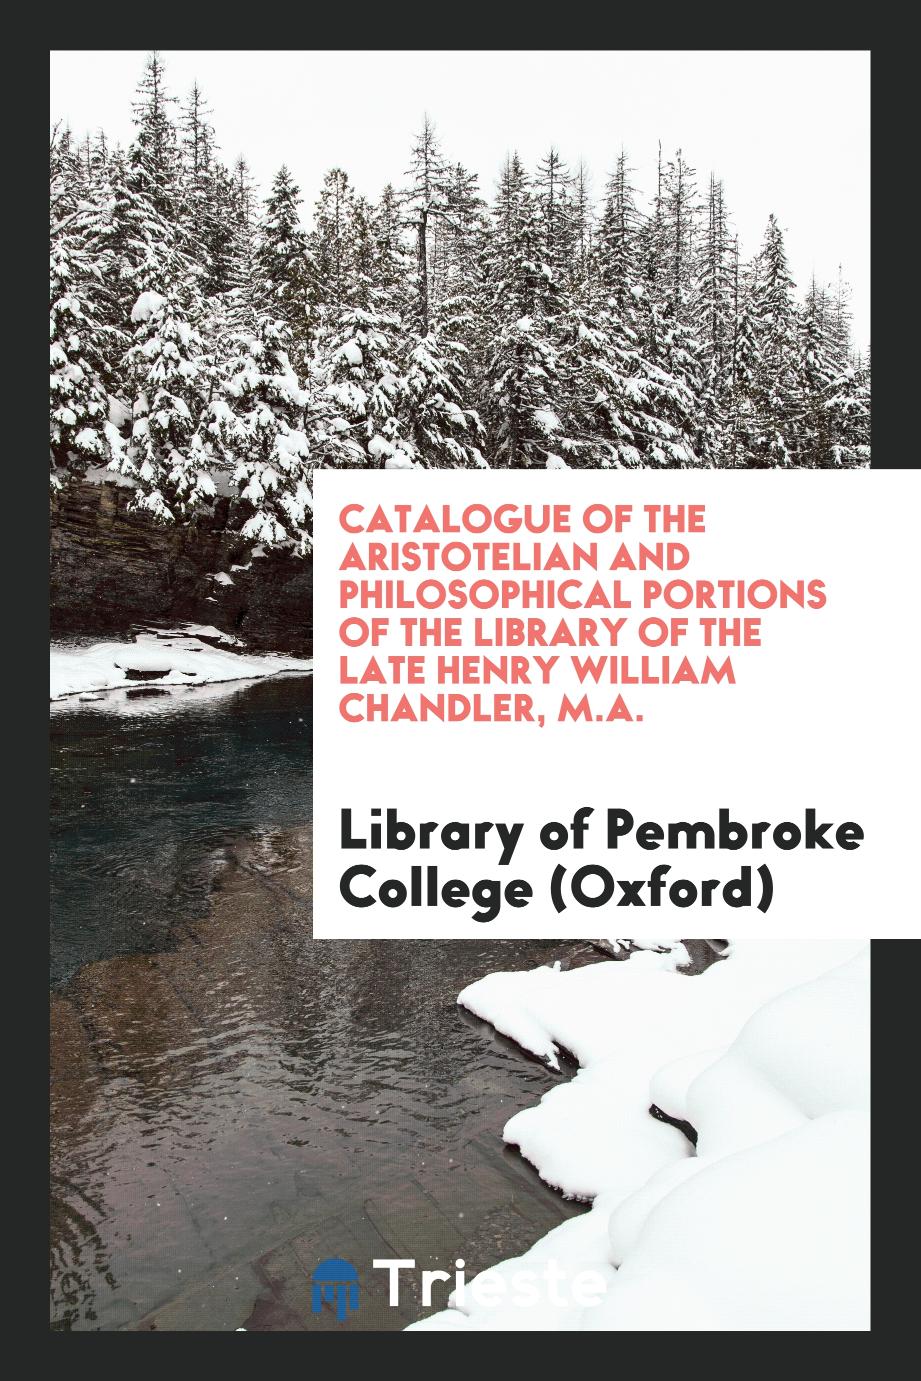 Catalogue of the Aristotelian and Philosophical Portions of the Library of the Late Henry William Chandler, M.A.